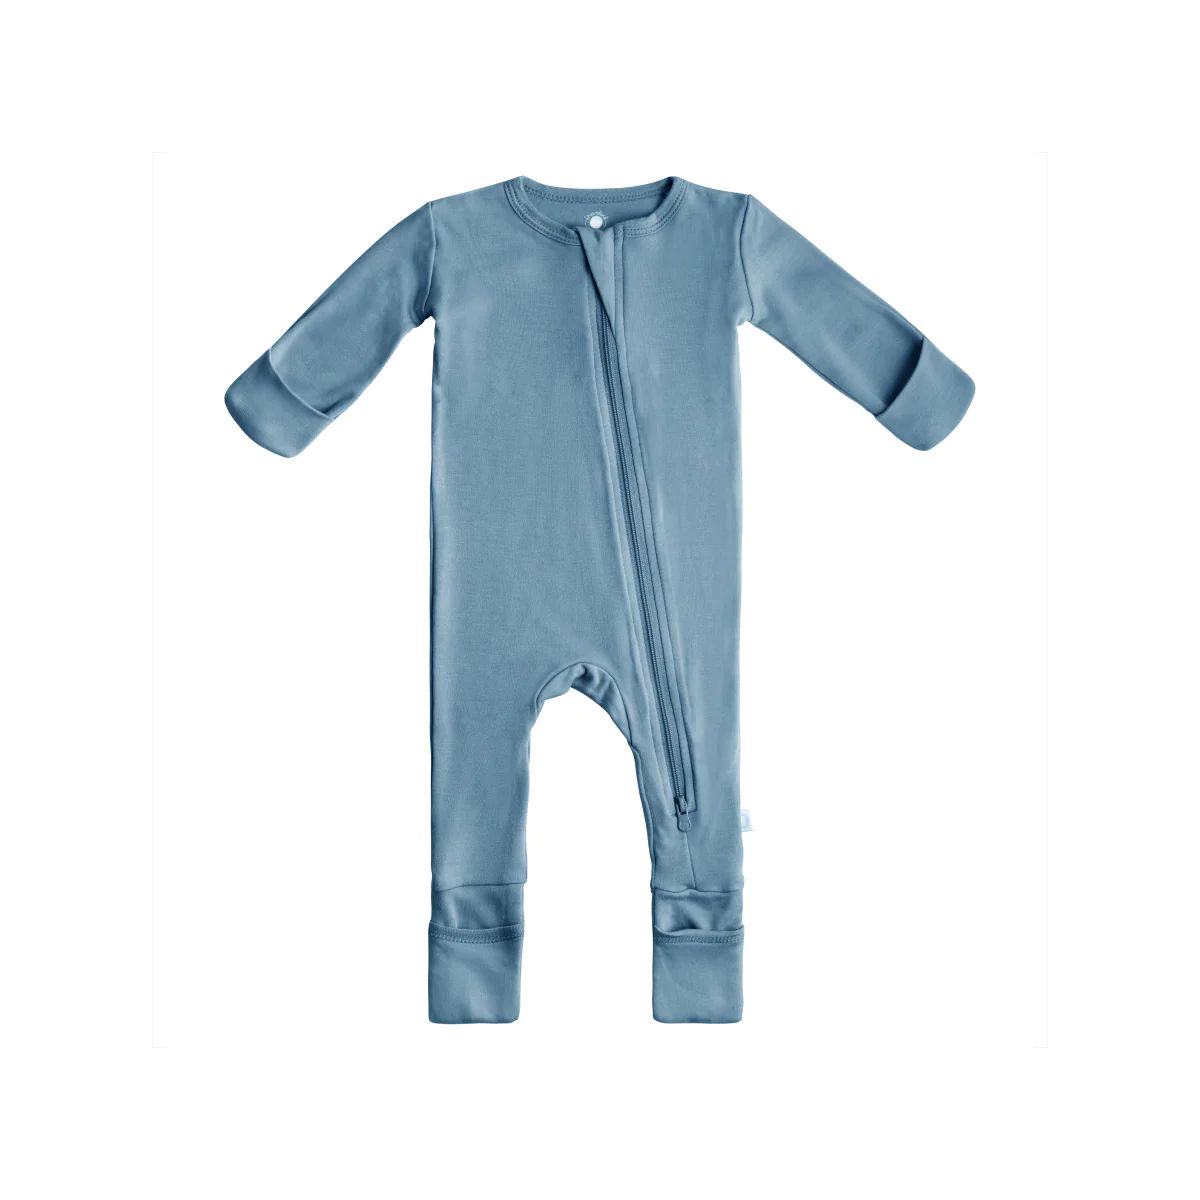 Baby Bamboo Pajamas w/ DreamCuffs - Solids | Dreamland Baby